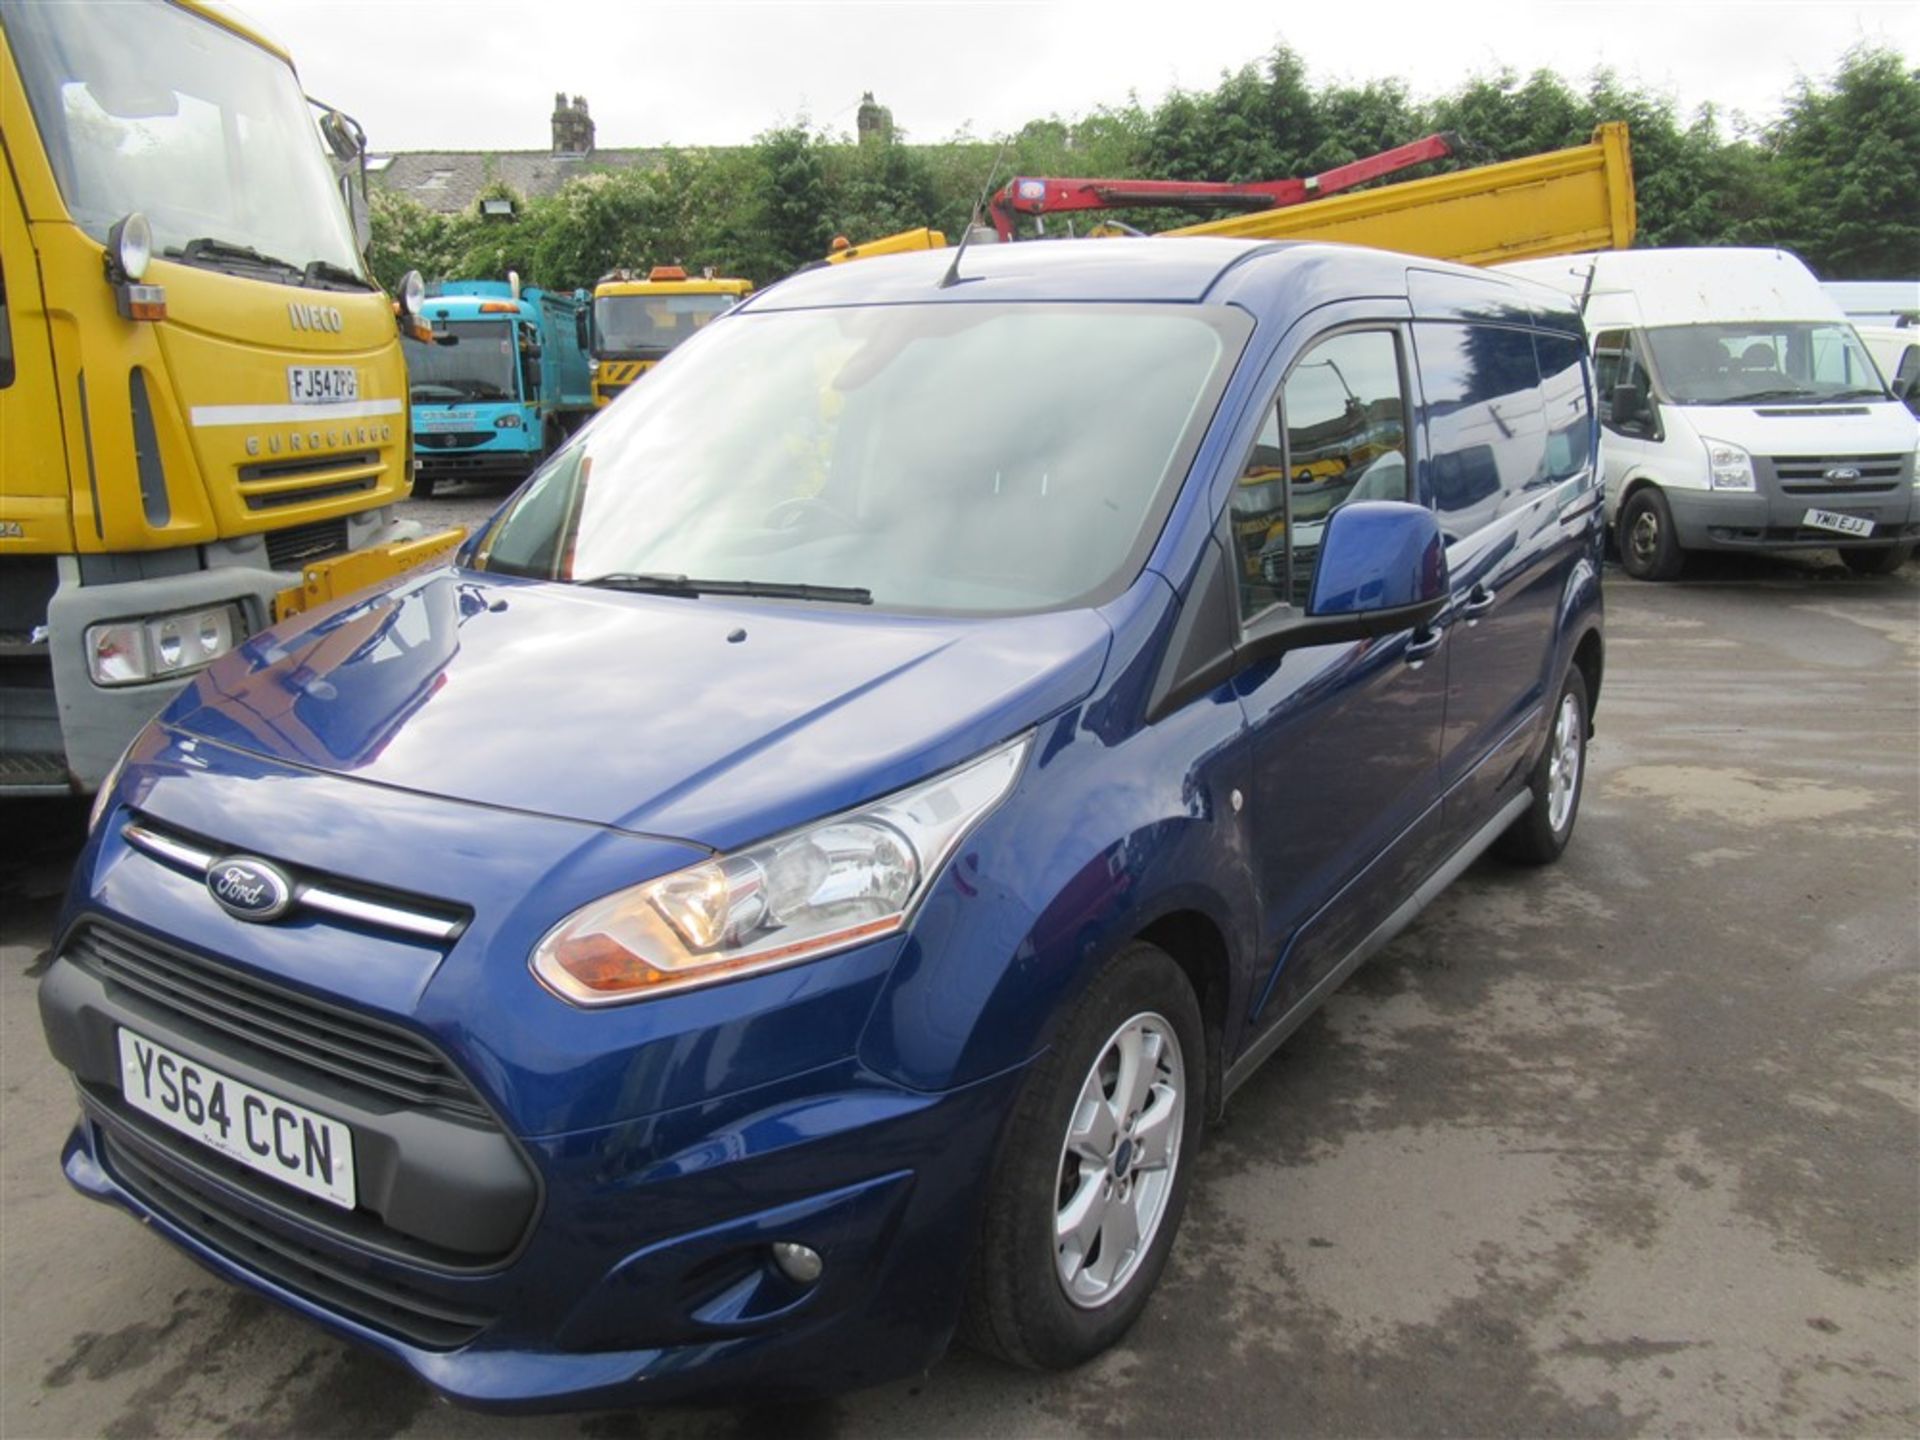 64 reg FORD TRANSIT CONNECT 240 LIMITED, 1ST REG 12/14, 128144M WARRANTED, V5 HERE, 1 OWNER FROM NEW - Image 2 of 7